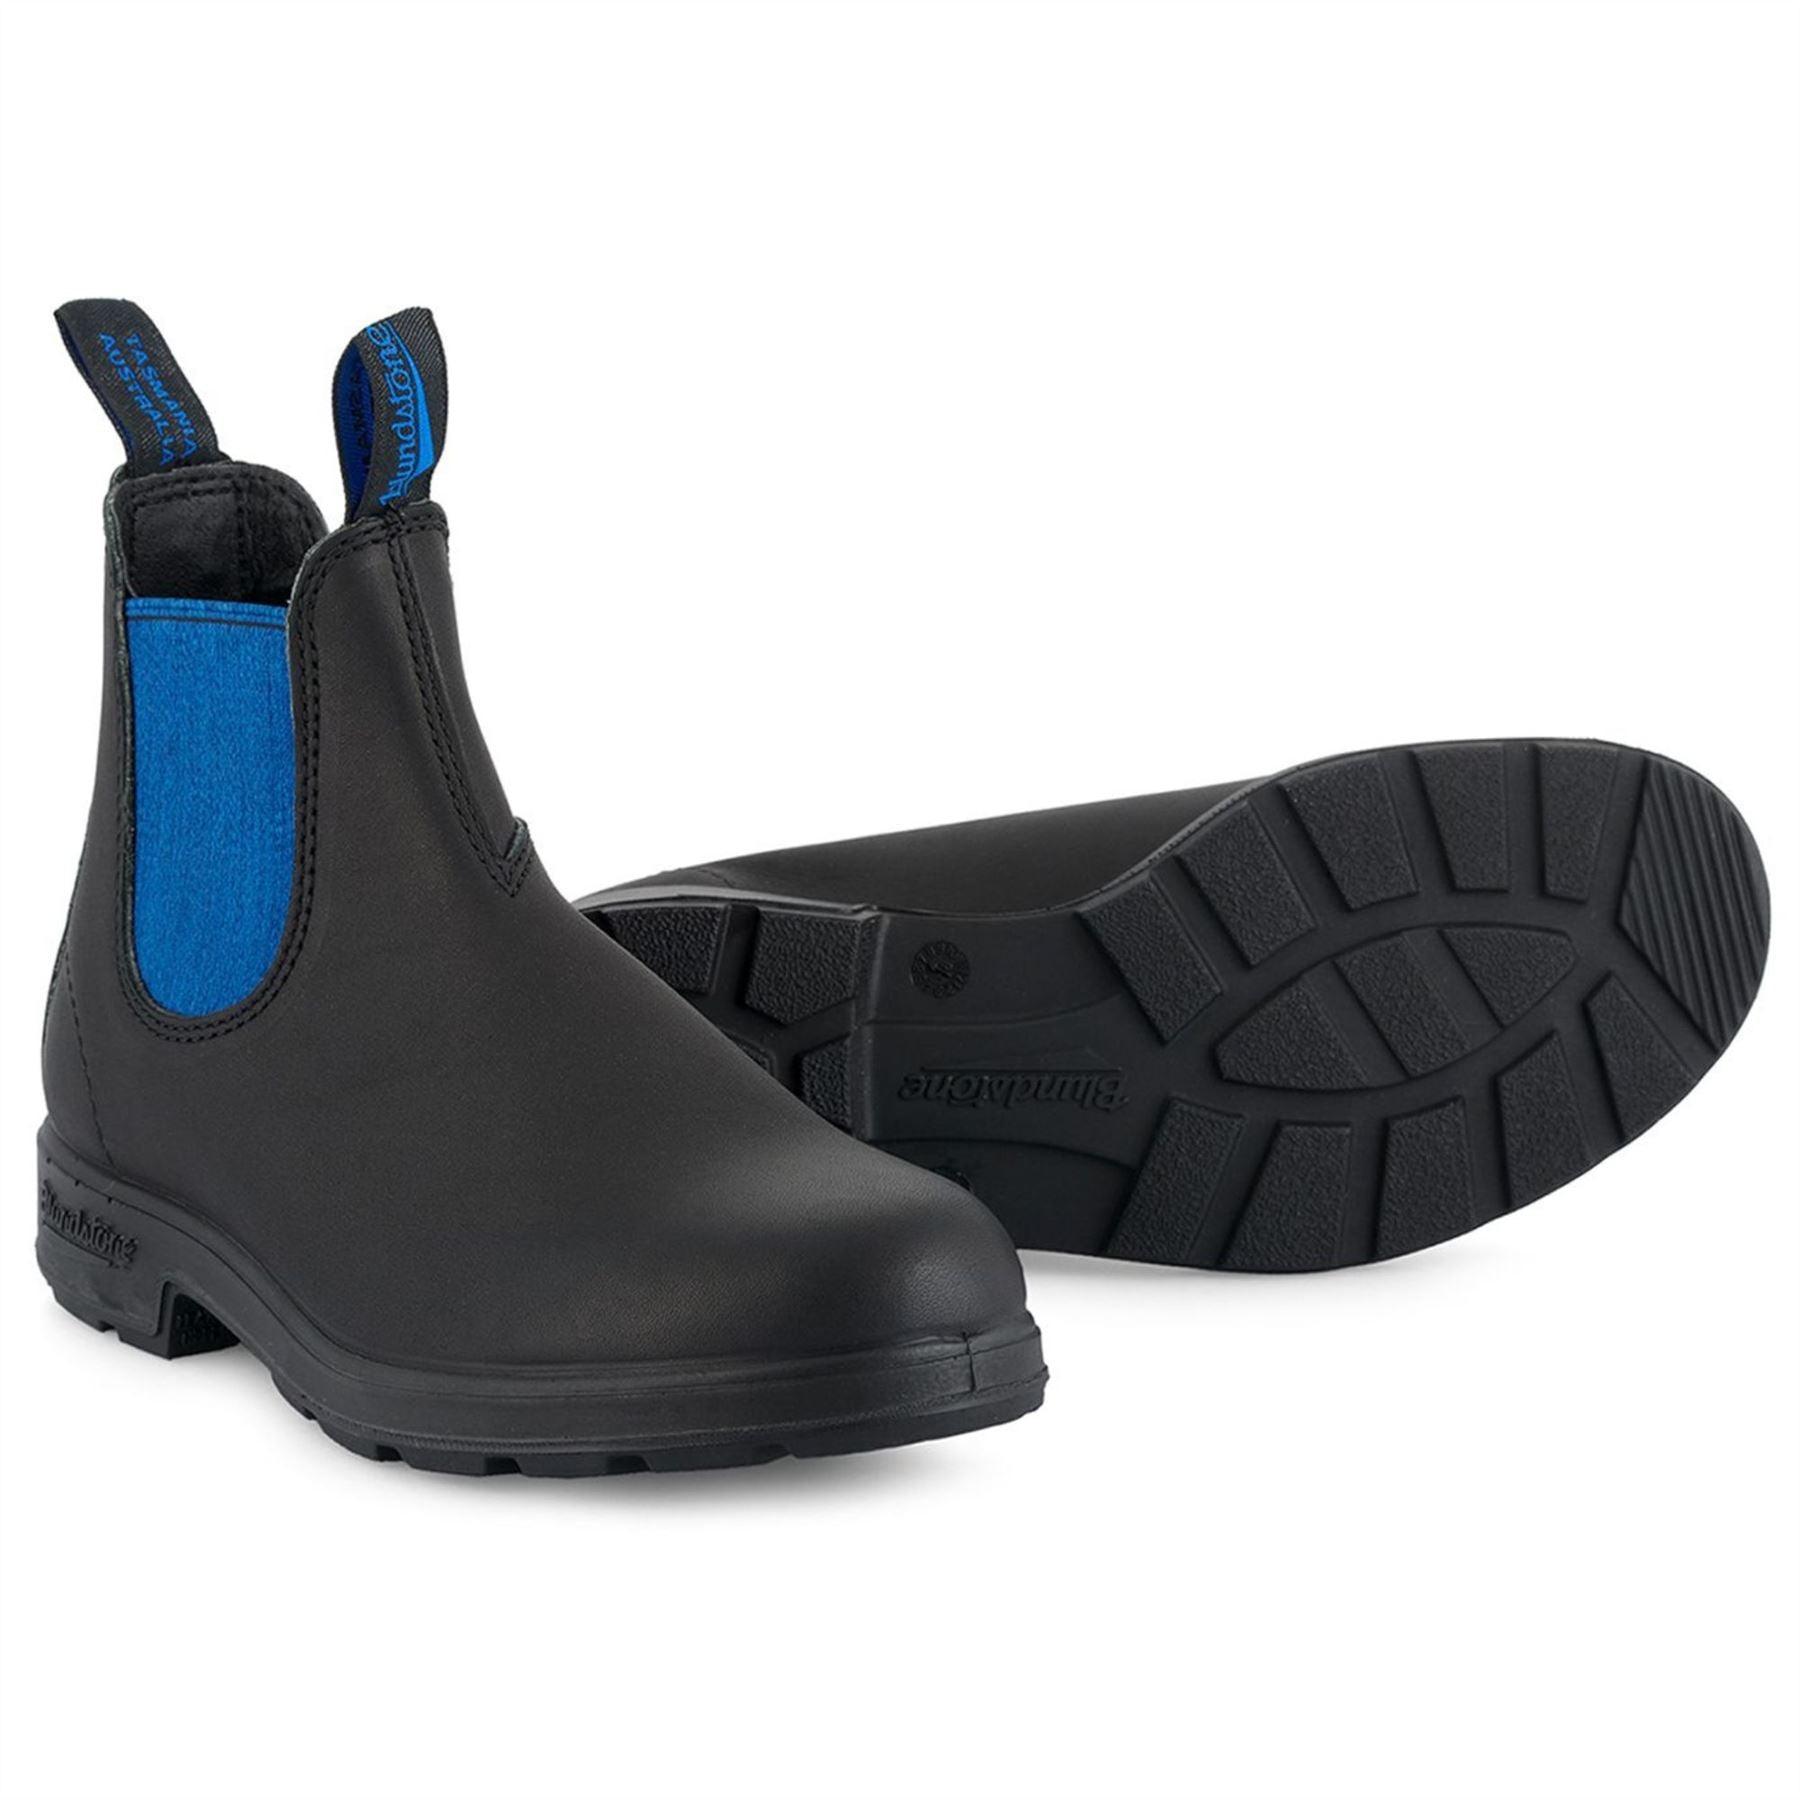 Blundstone 515 Black Blue Leather Chelsea Boots Black Blue Slip On Retro Ankle - Knighthood Store